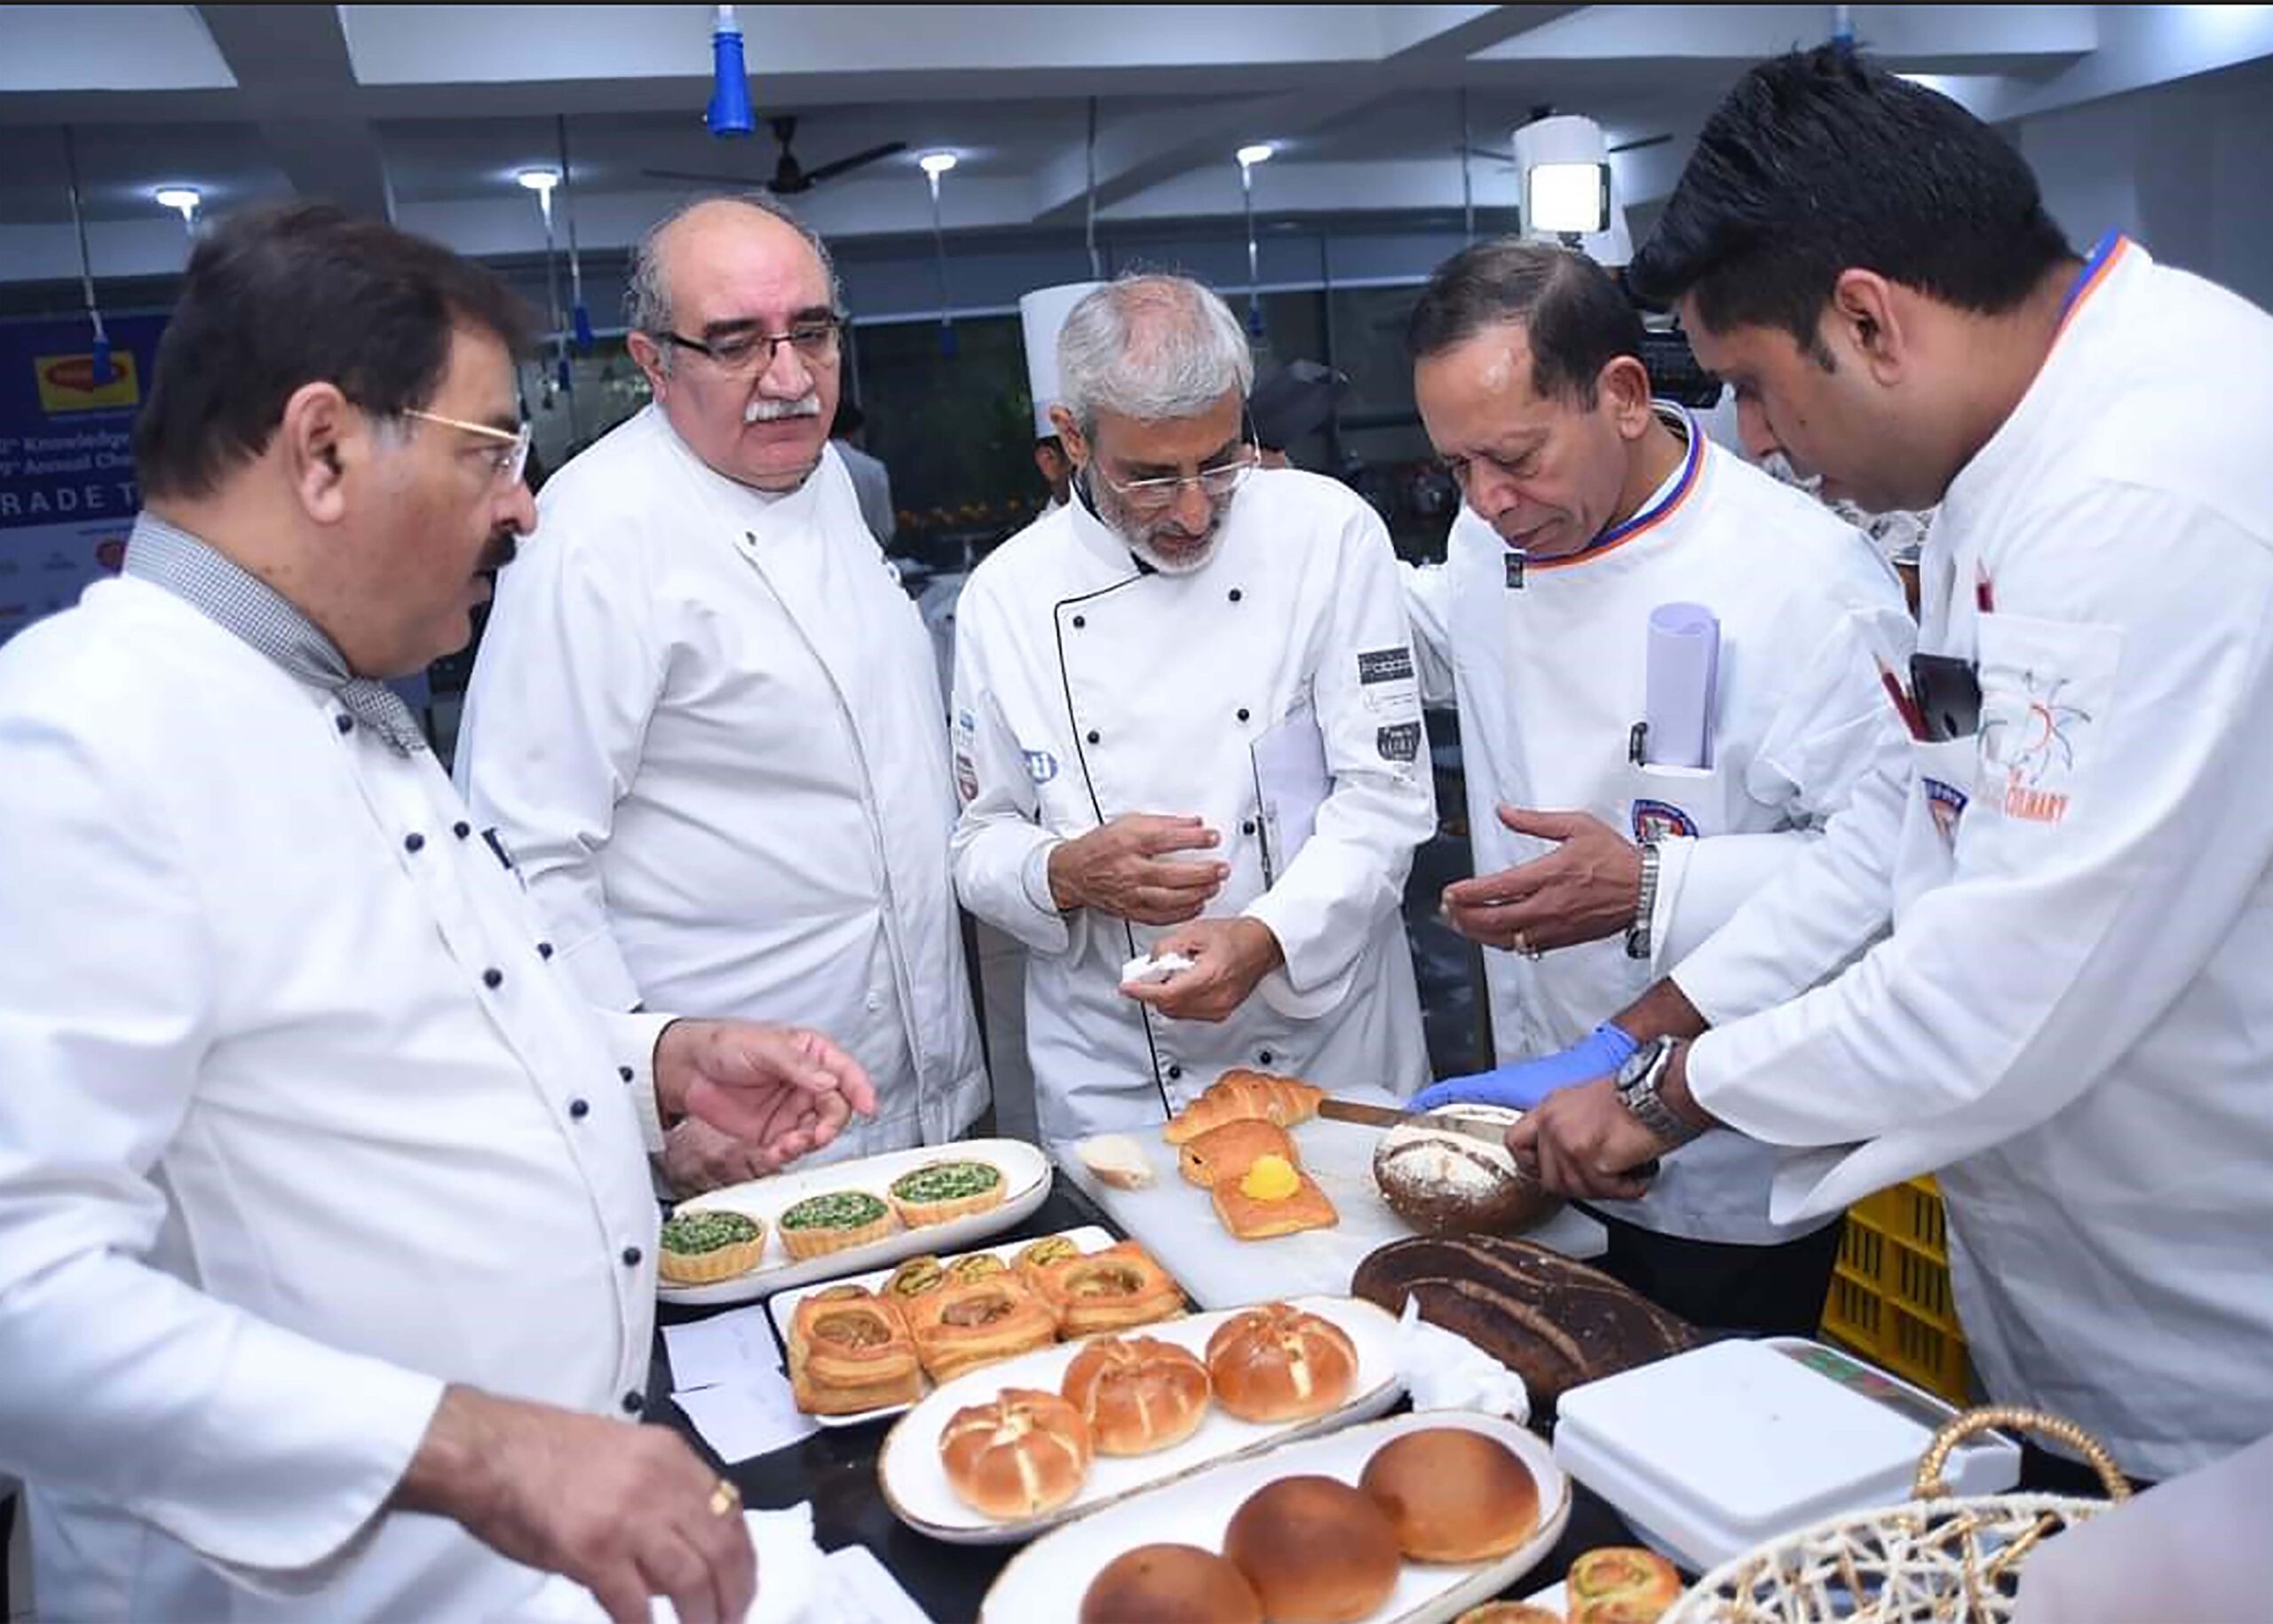 Over 150 chefs showcased their Culinary skills for Chef Awards 2022